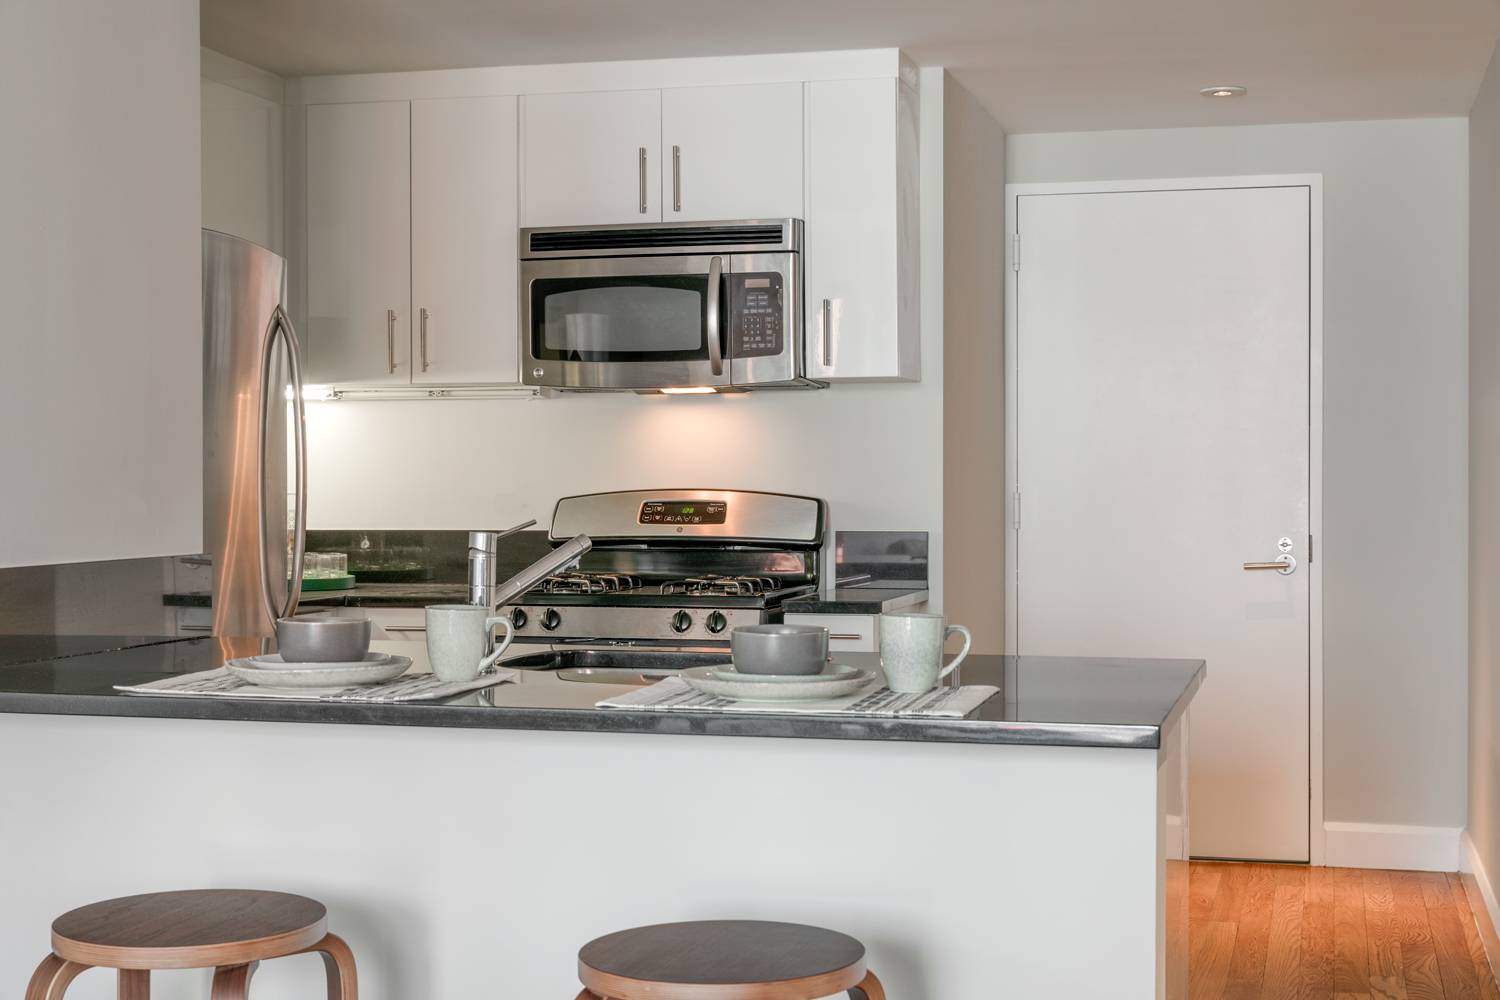 Downtown BROOKLYN *STUDIO* Hi-Rise/ Full Amenity / 24-Hour Concierge / Brooklyn Bridge Views/ Minutes to Manhattan / Outdoor Rooftop / Terrace / Fireplace / BBQ Space / Lounge Room / Fitness Center